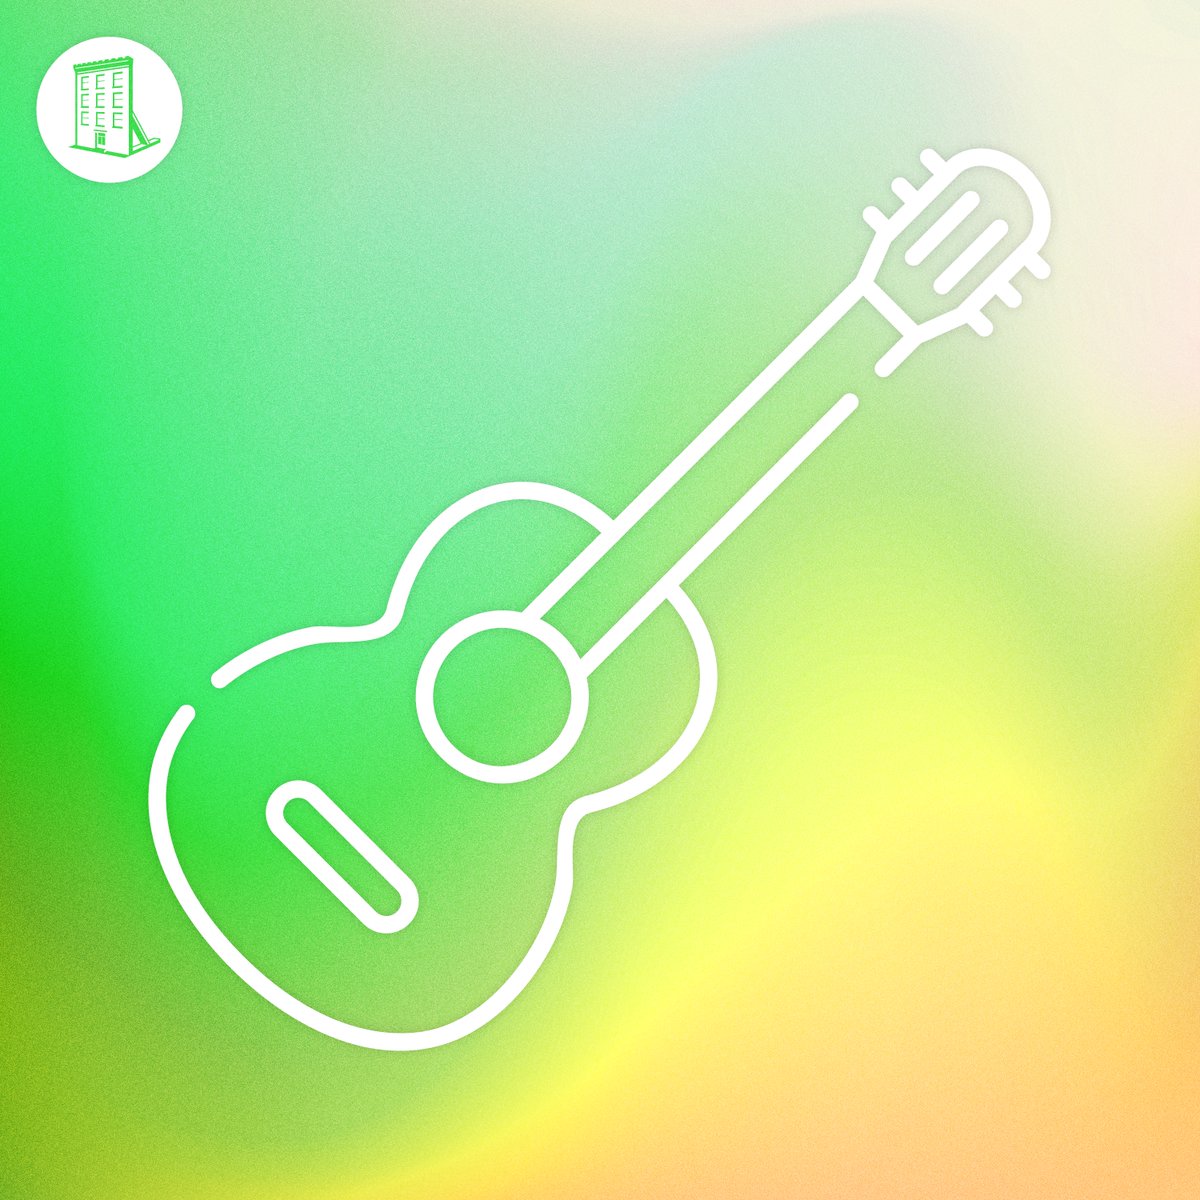 To help bring some chill to your day. Listen to Acoustic Indie on @AppleMusic geo.music.apple.com/ca/playlist/ac…